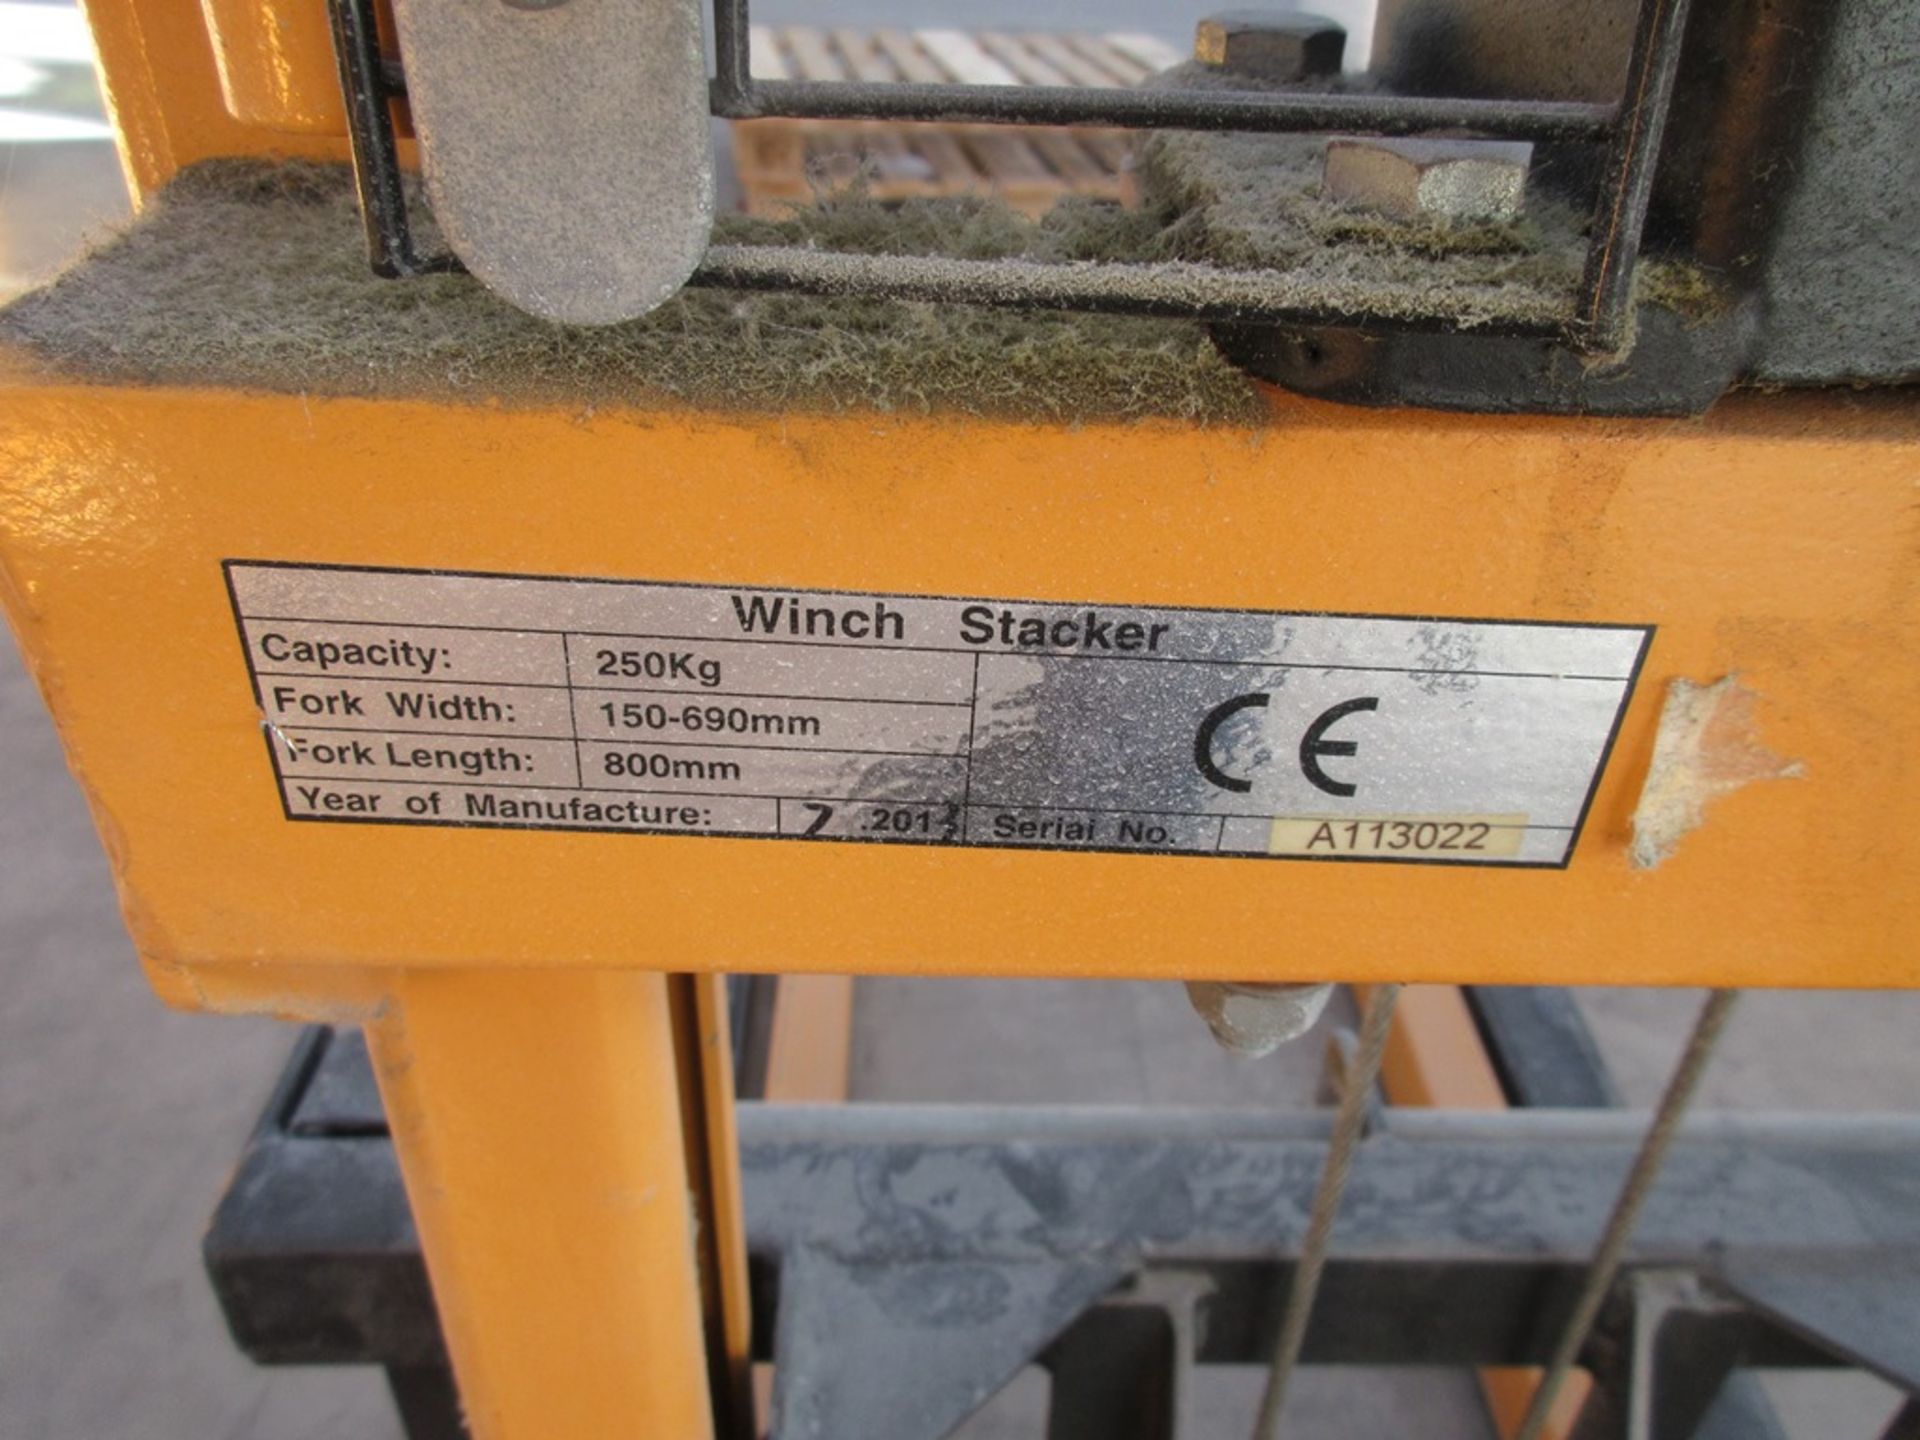 Total Lifter 250kg winch stacker, fork width 150-690m, fork length 800mm, lift height 1500mm, serial - Image 3 of 5